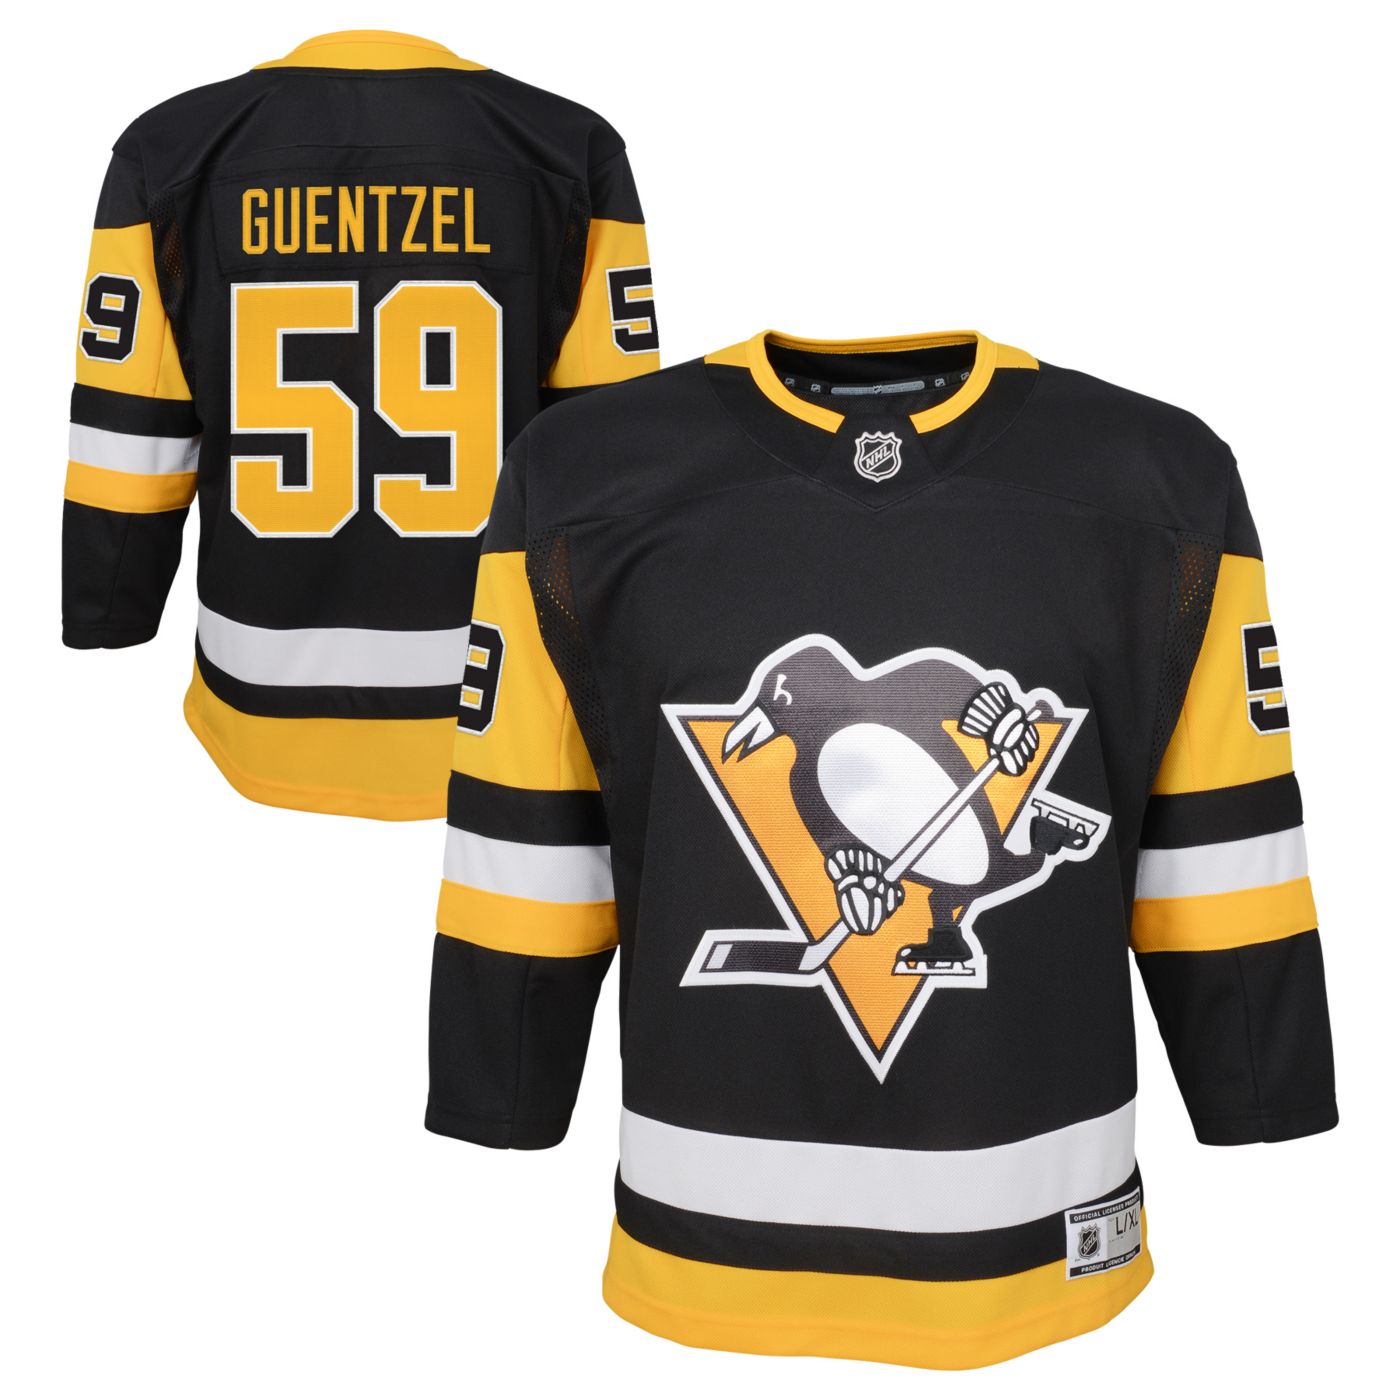 NHL Youth Pittsburgh Penguins Jake Guentzel #59 Premier Home Jersey   DICK'S Sporting ...